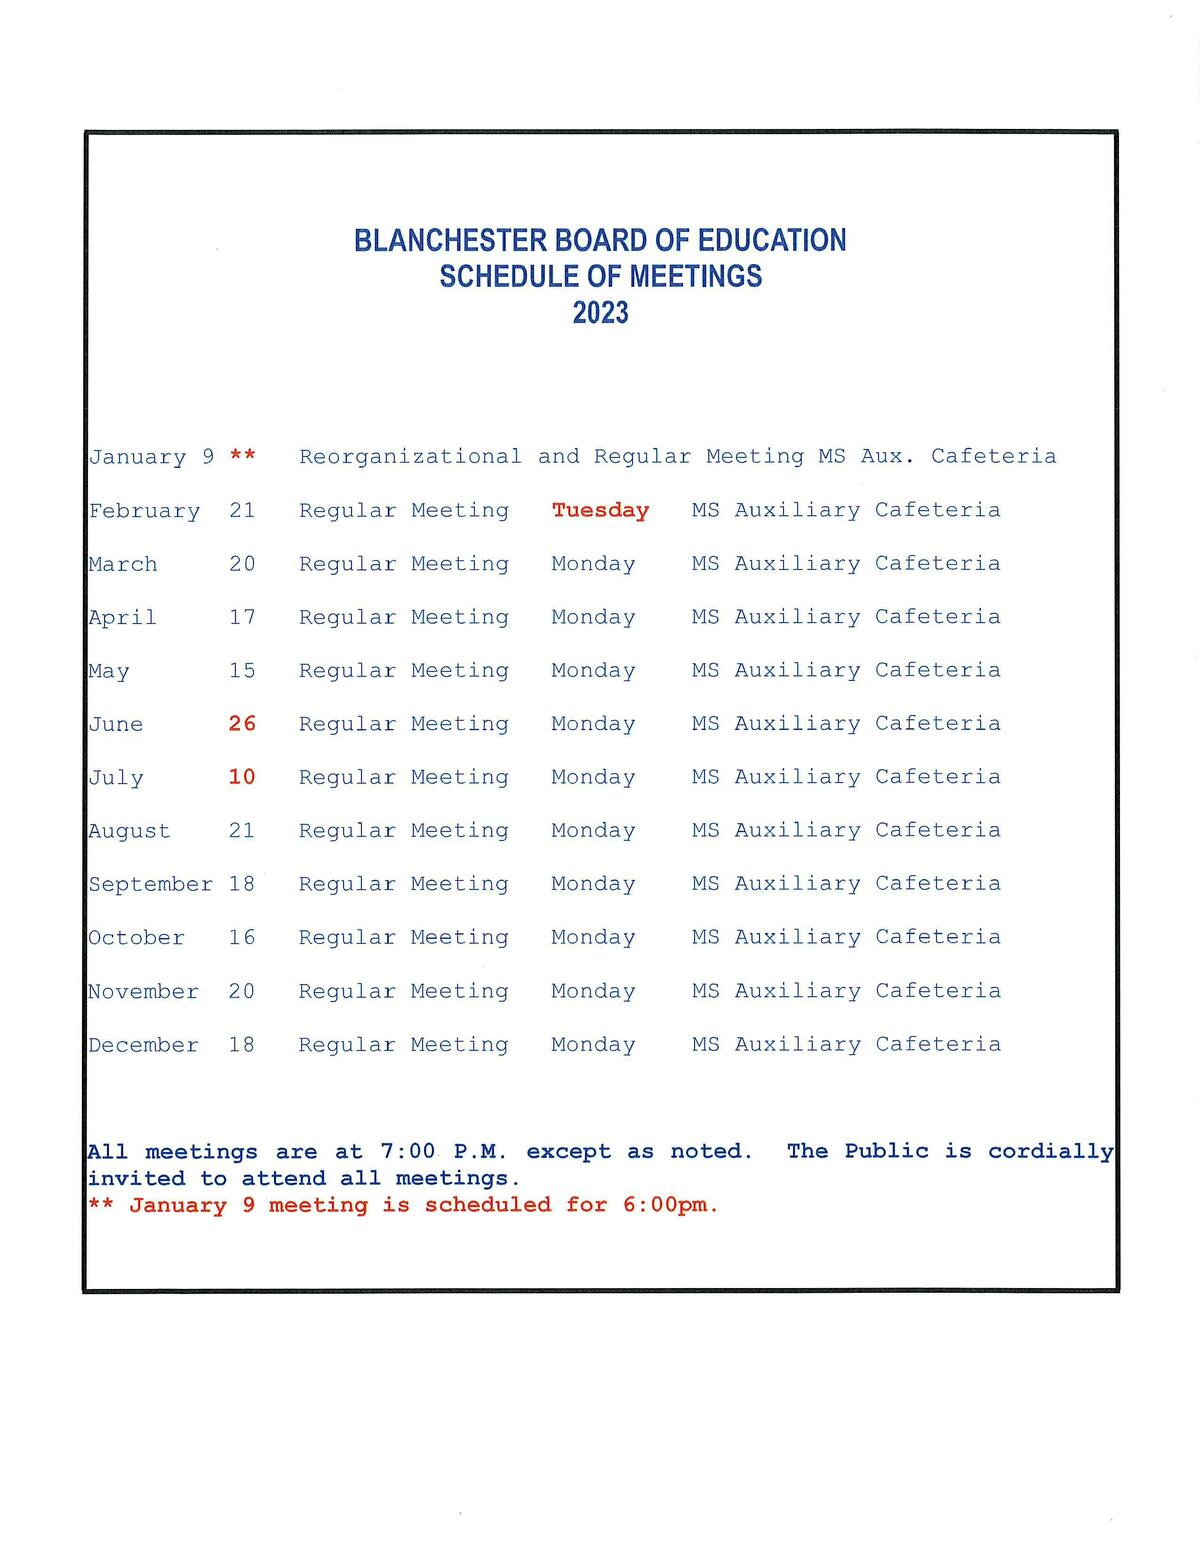 Blanchester Board meeting schedule